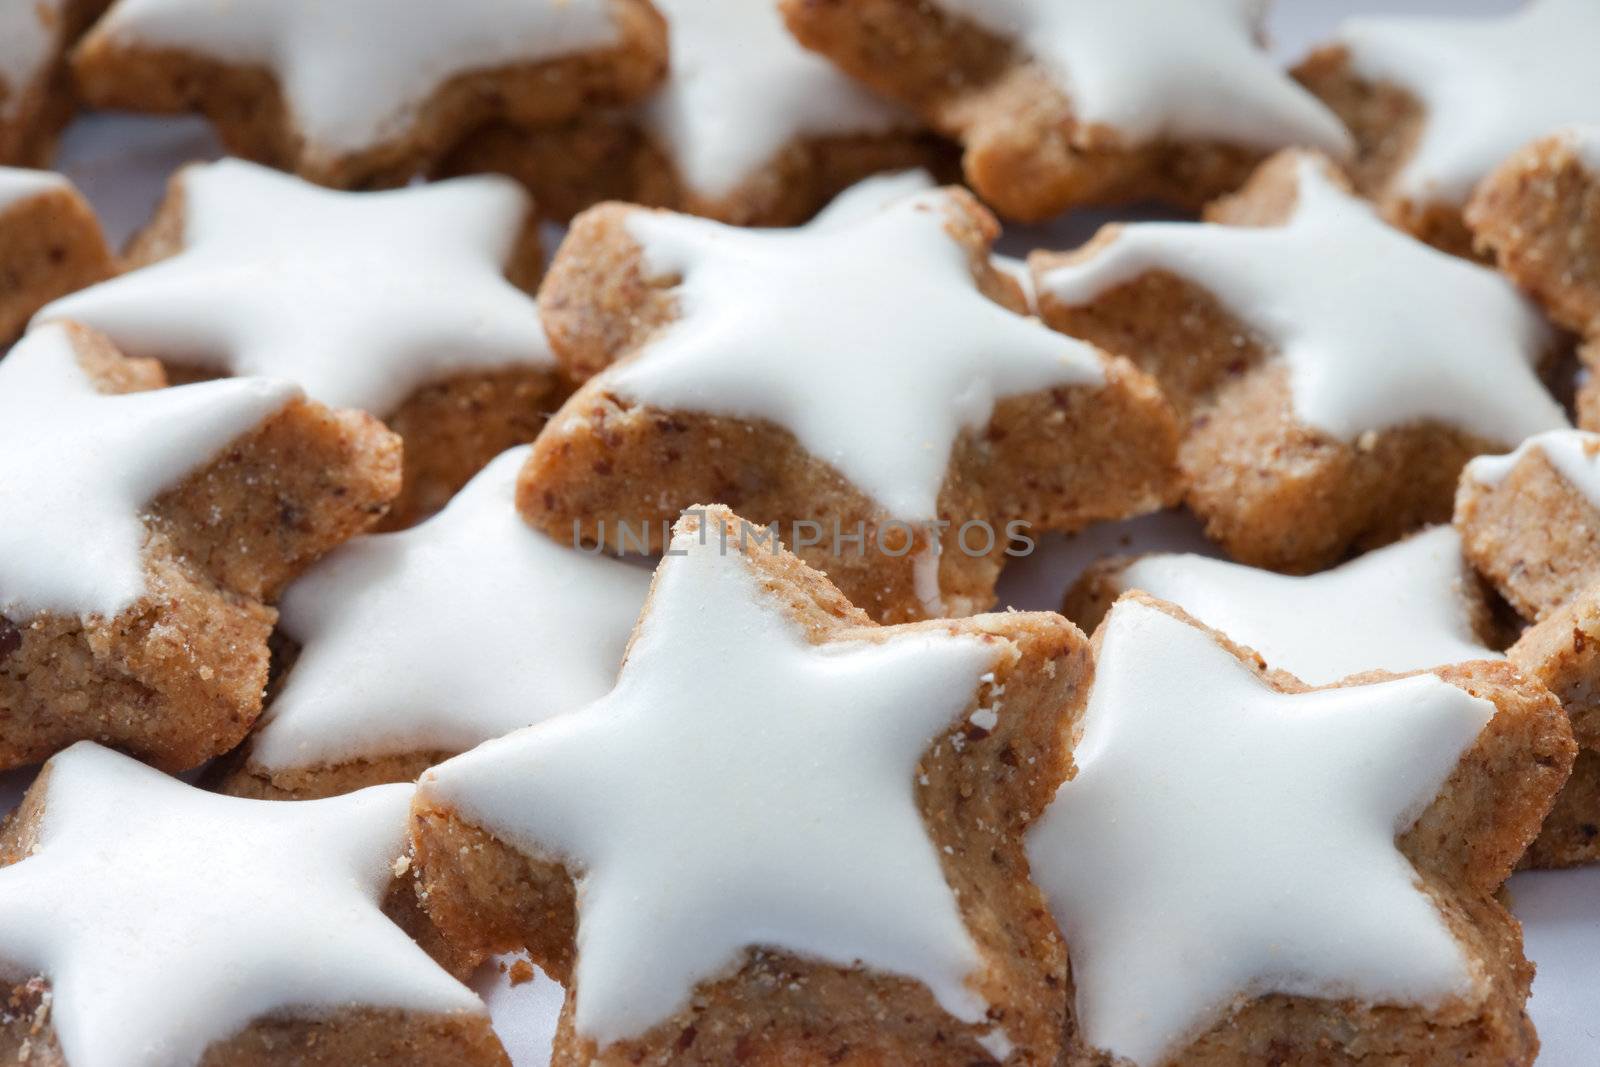 Star-shaped cookies by Gravicapa